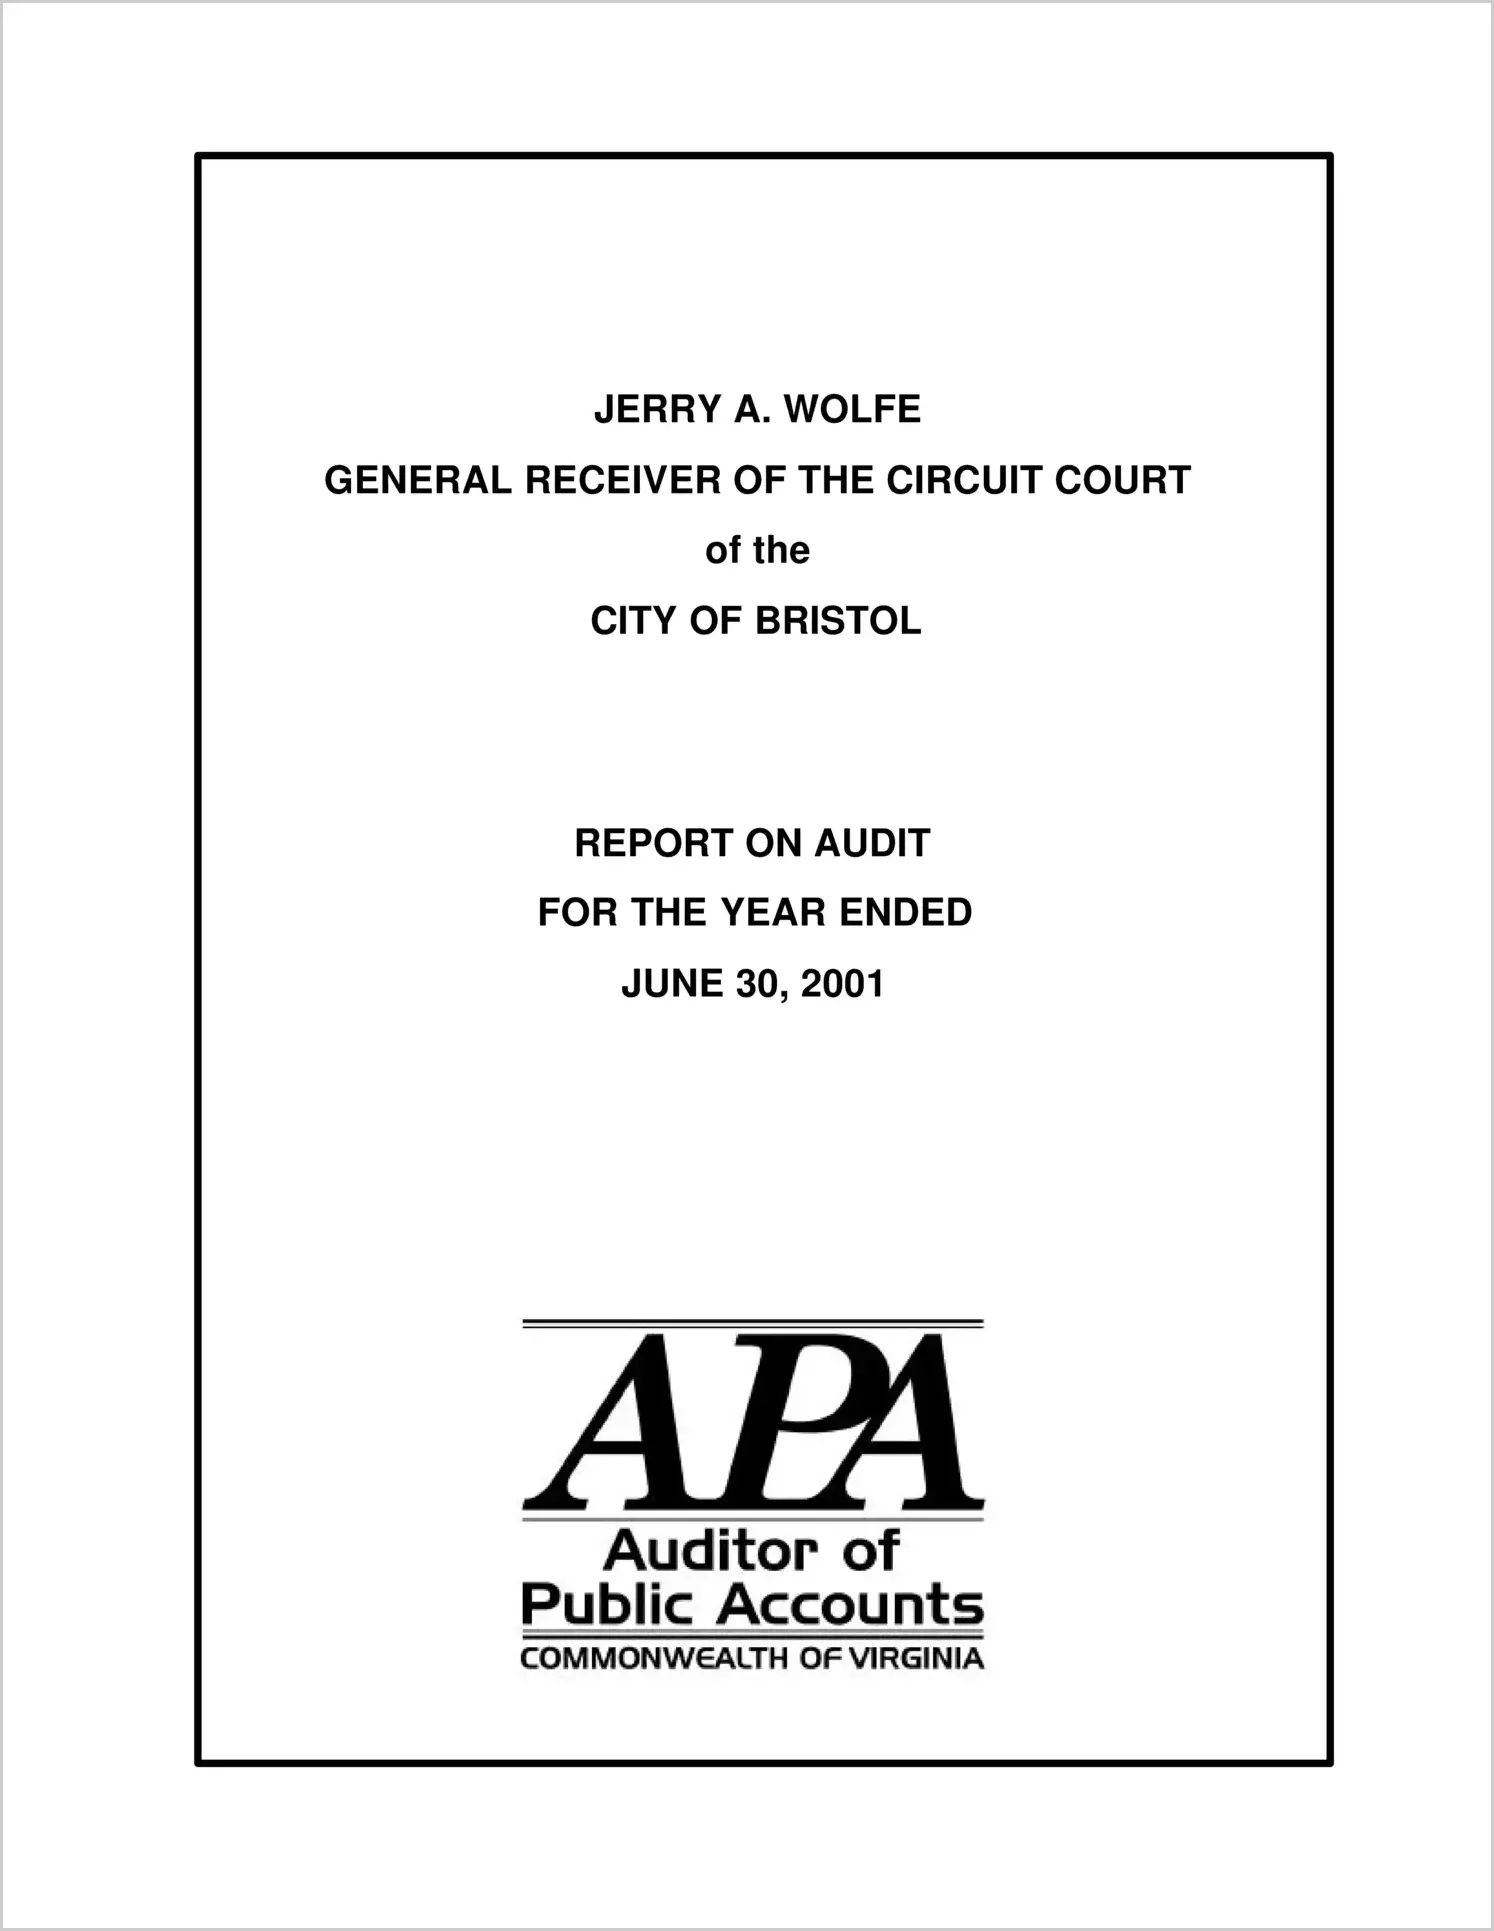 General Receiver of the Circuit Court of the City of Bristol  for the year ended June 30, 2001